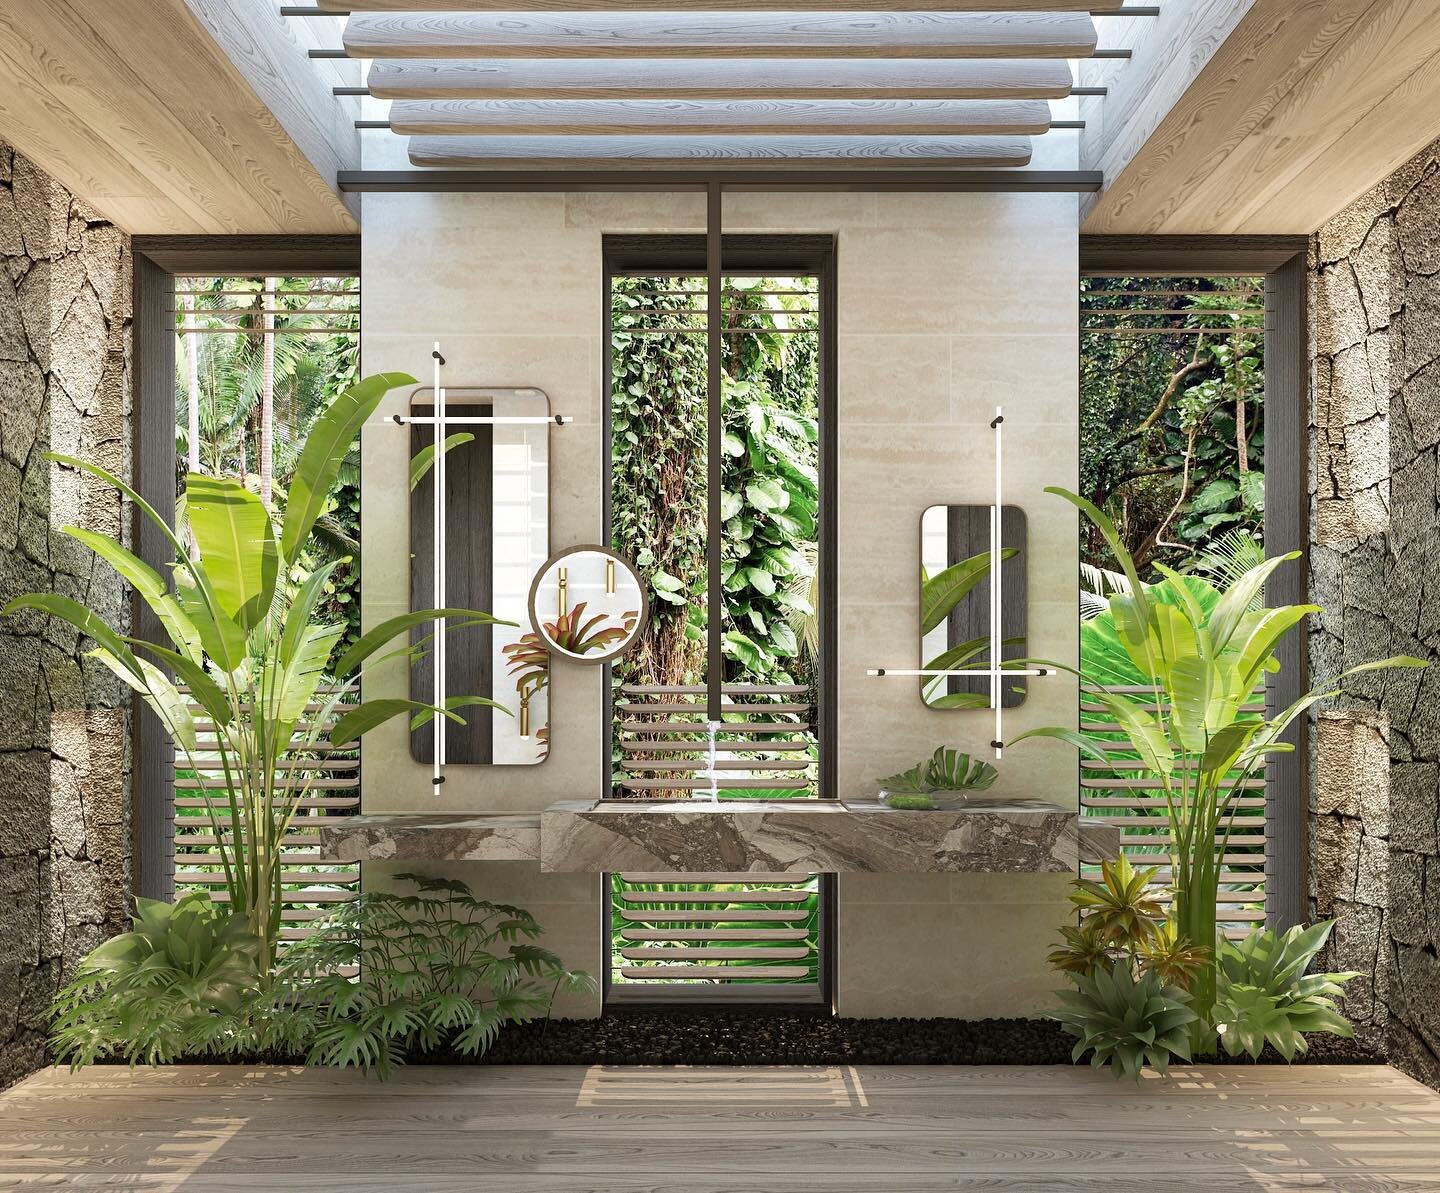 P2 - Powder Room 

Lava rock and Ivory Travertine walls frame a floating Positano Grey marble vanity, custom dark bronze ceiling-mounted faucet &amp; vegetated indoor rock garden. Wooden louvers screen sunlight at the windows and skylight. 

#designb